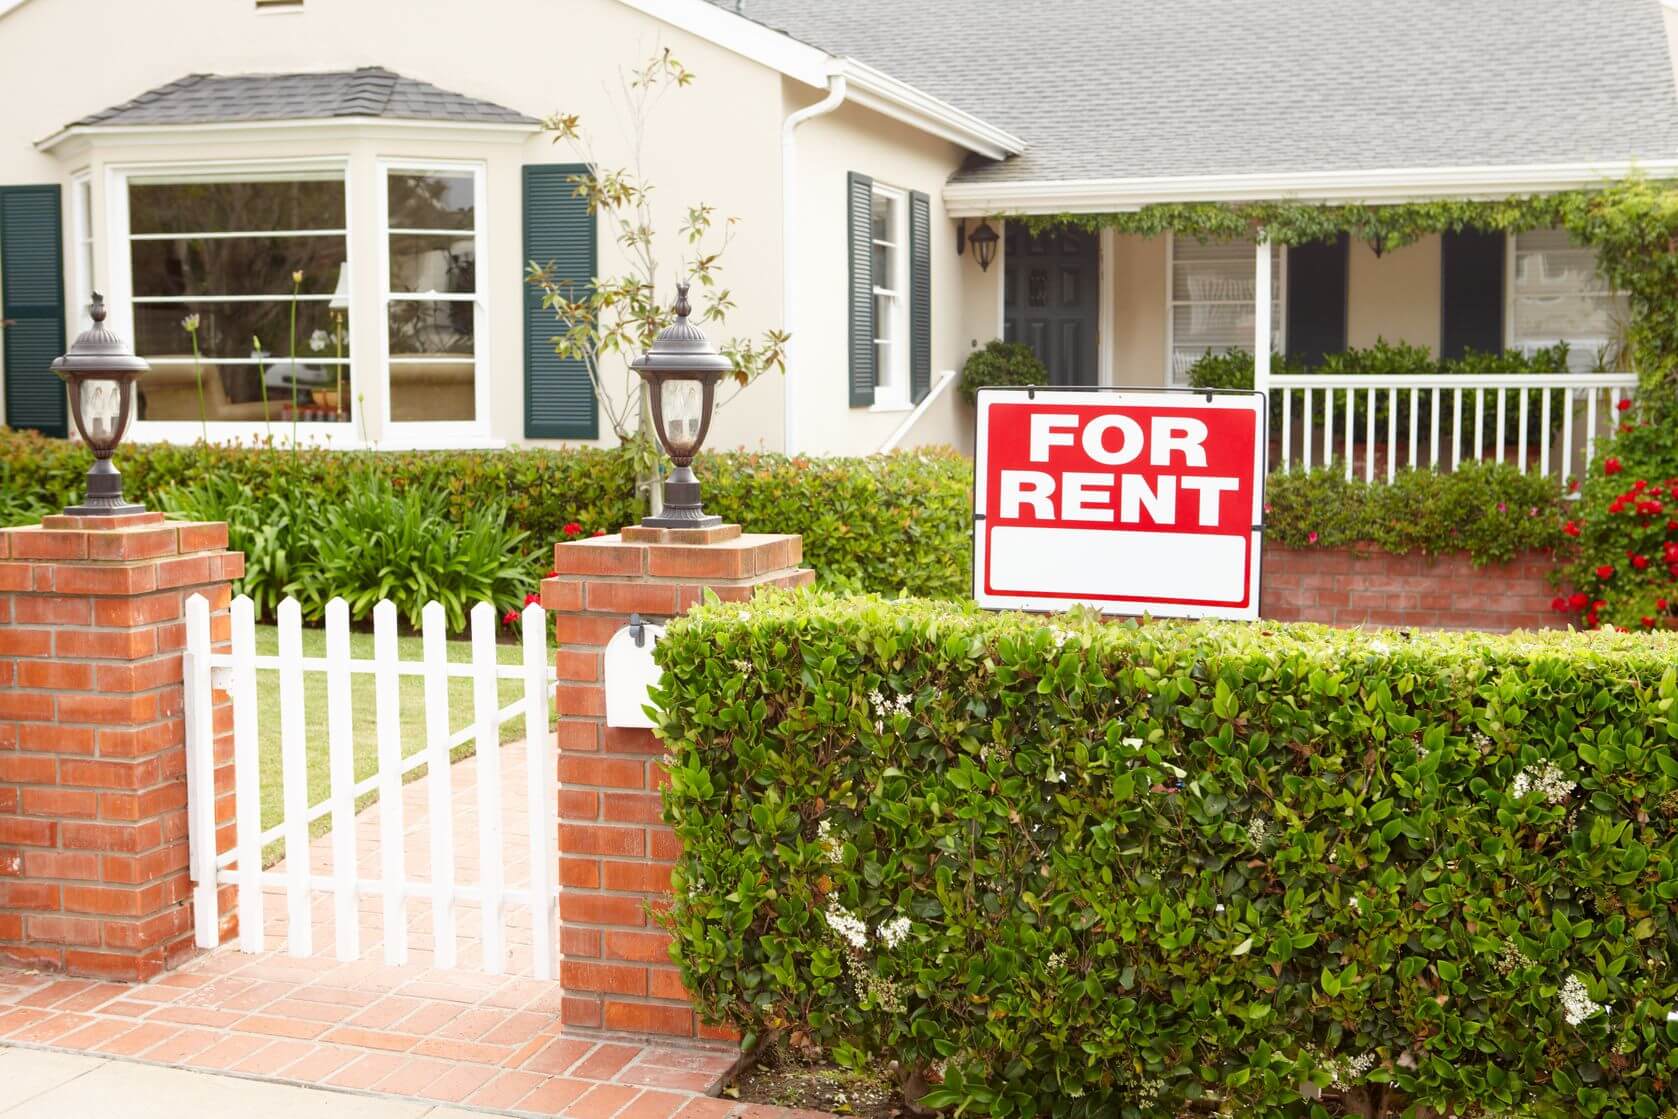 House with for rent sign